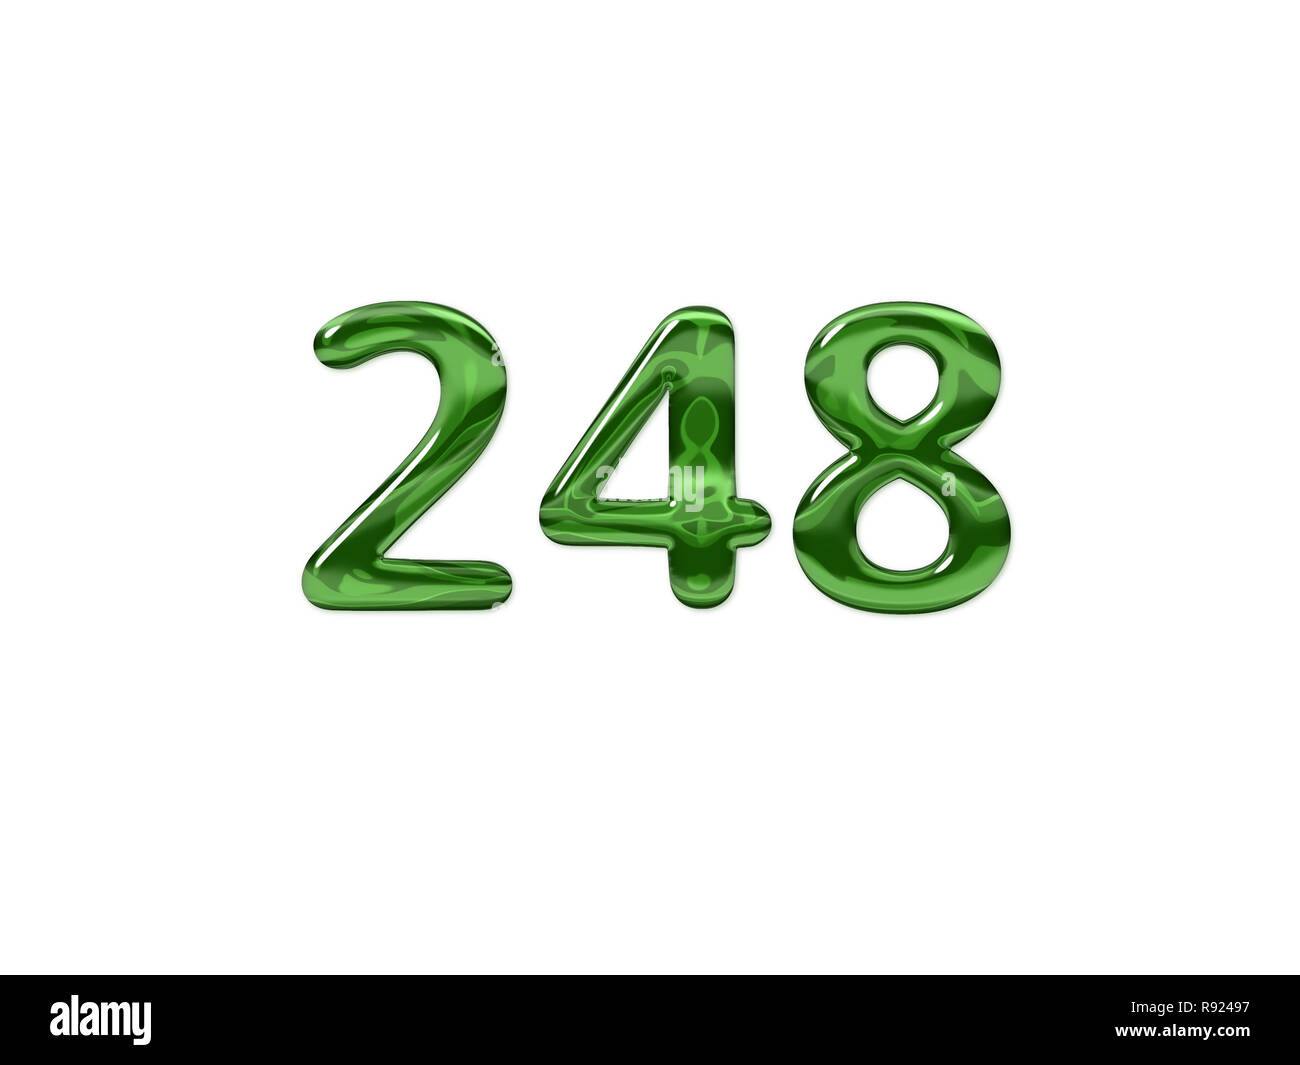 Green Number 248 isolated white background Stock Photo - Alamy